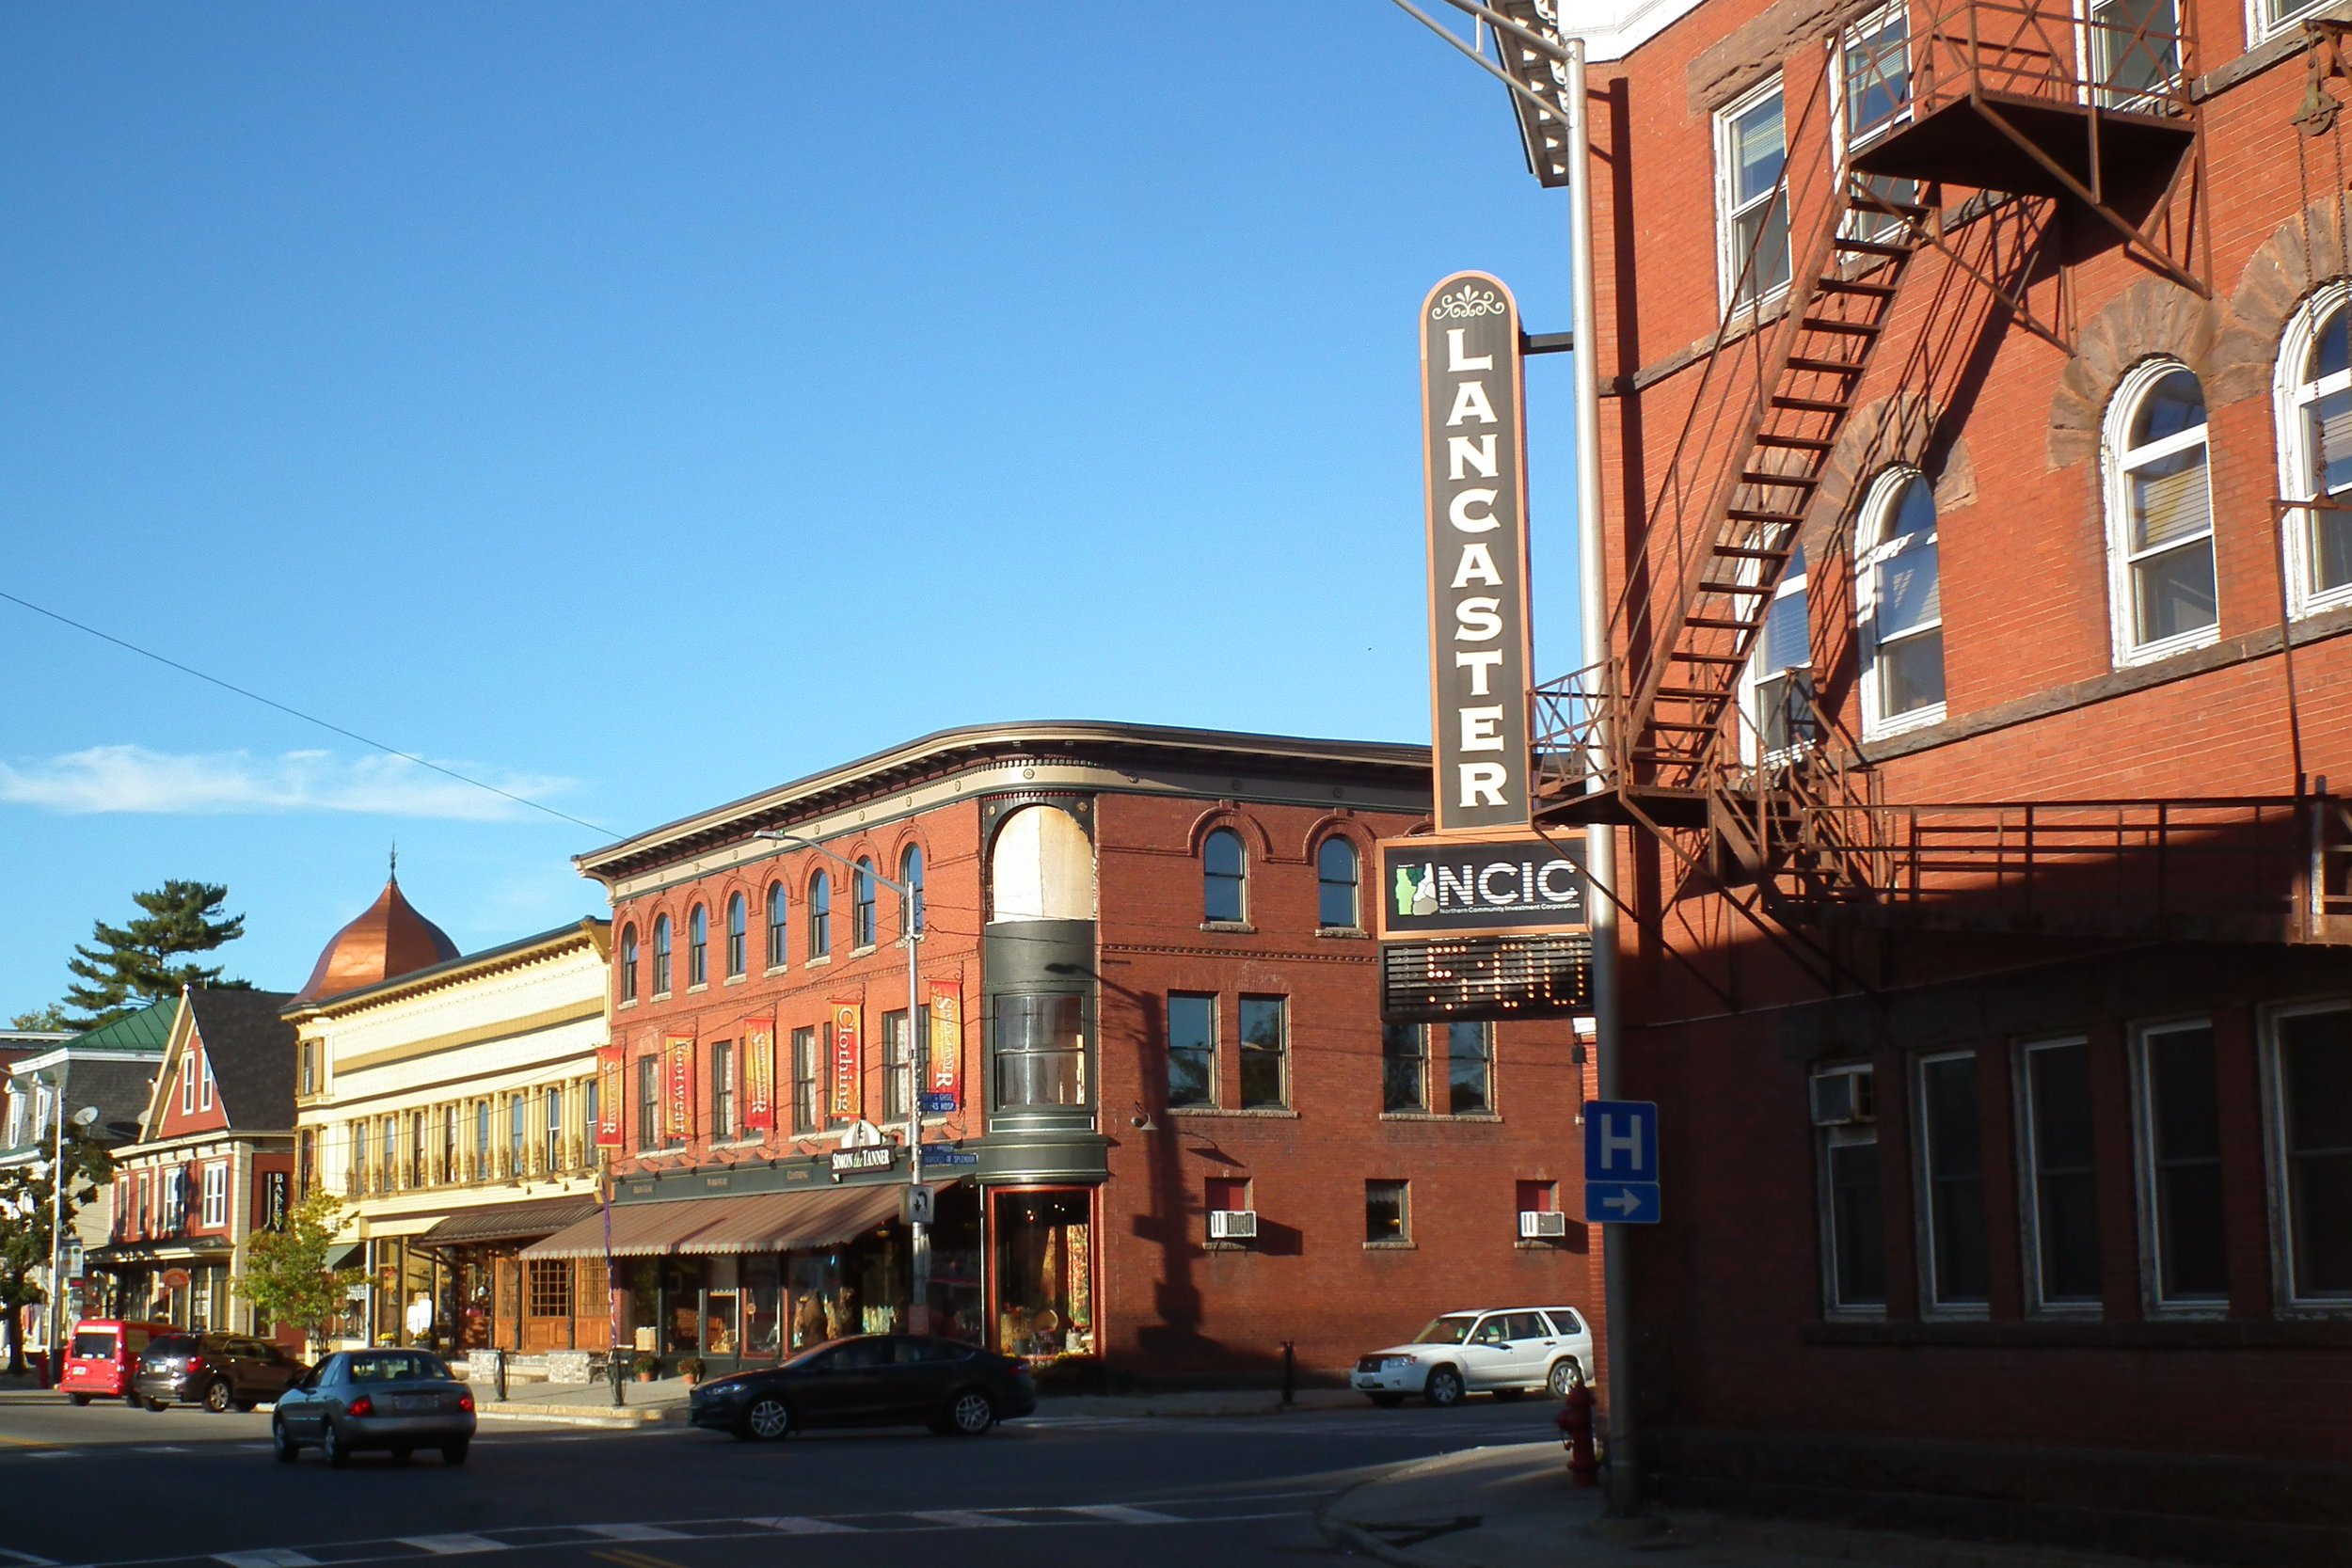  Lancaster's Main Street boasts great architecture and great local businesses. 